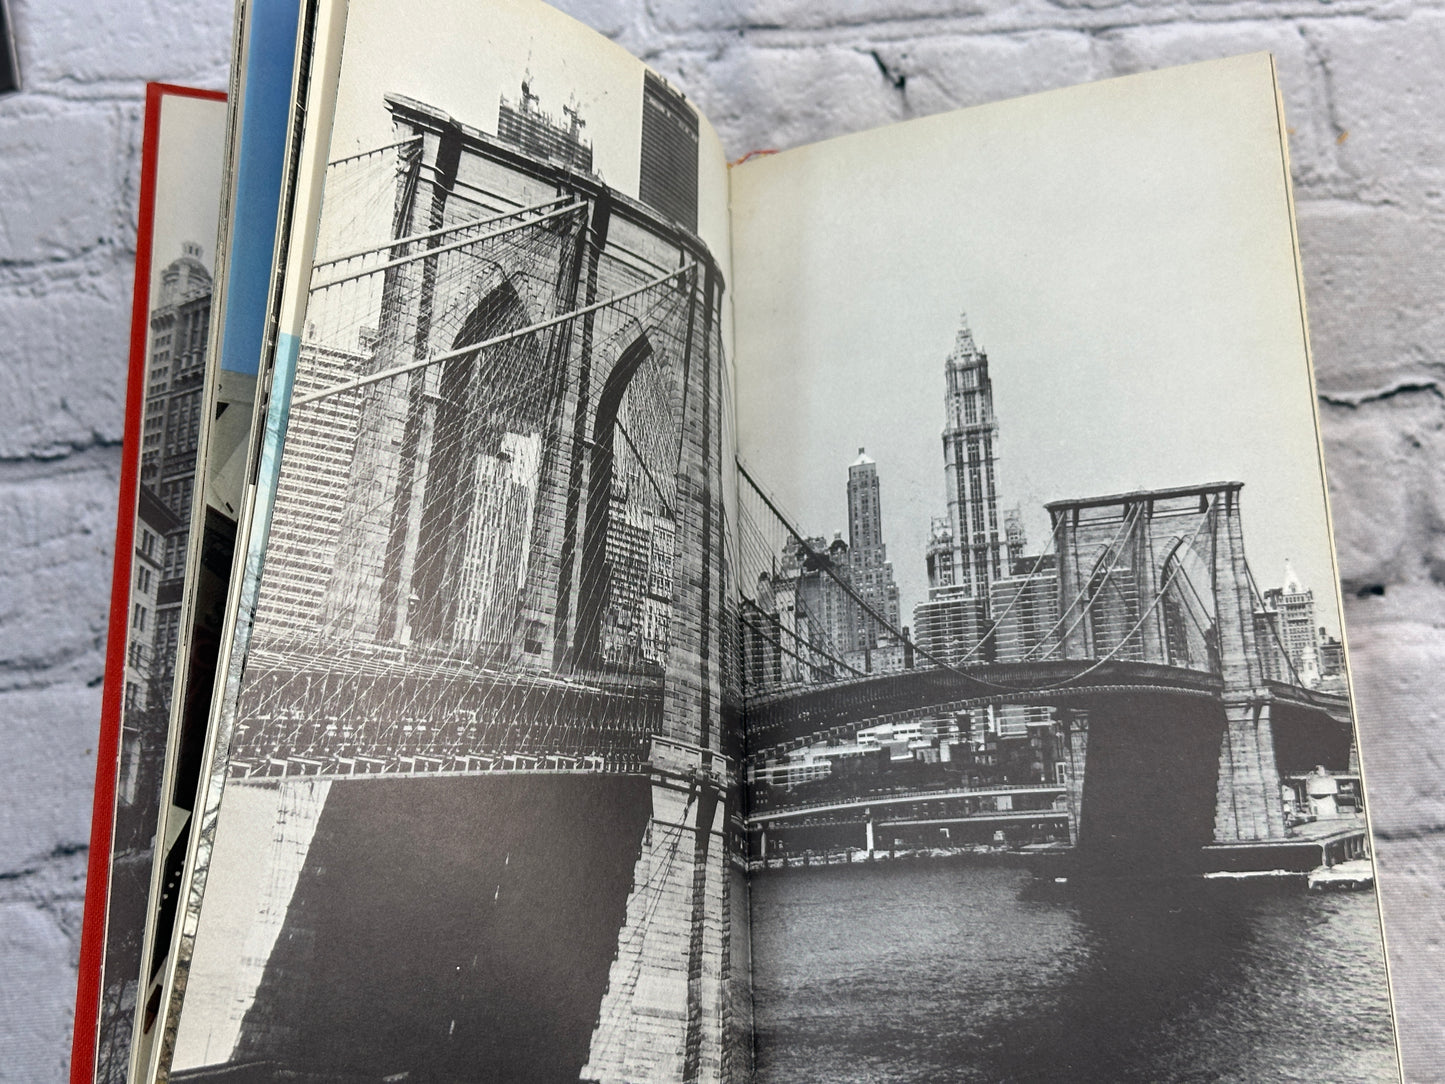 World Cultural Guides New York by Dore Ashton [1972 · First Edition]